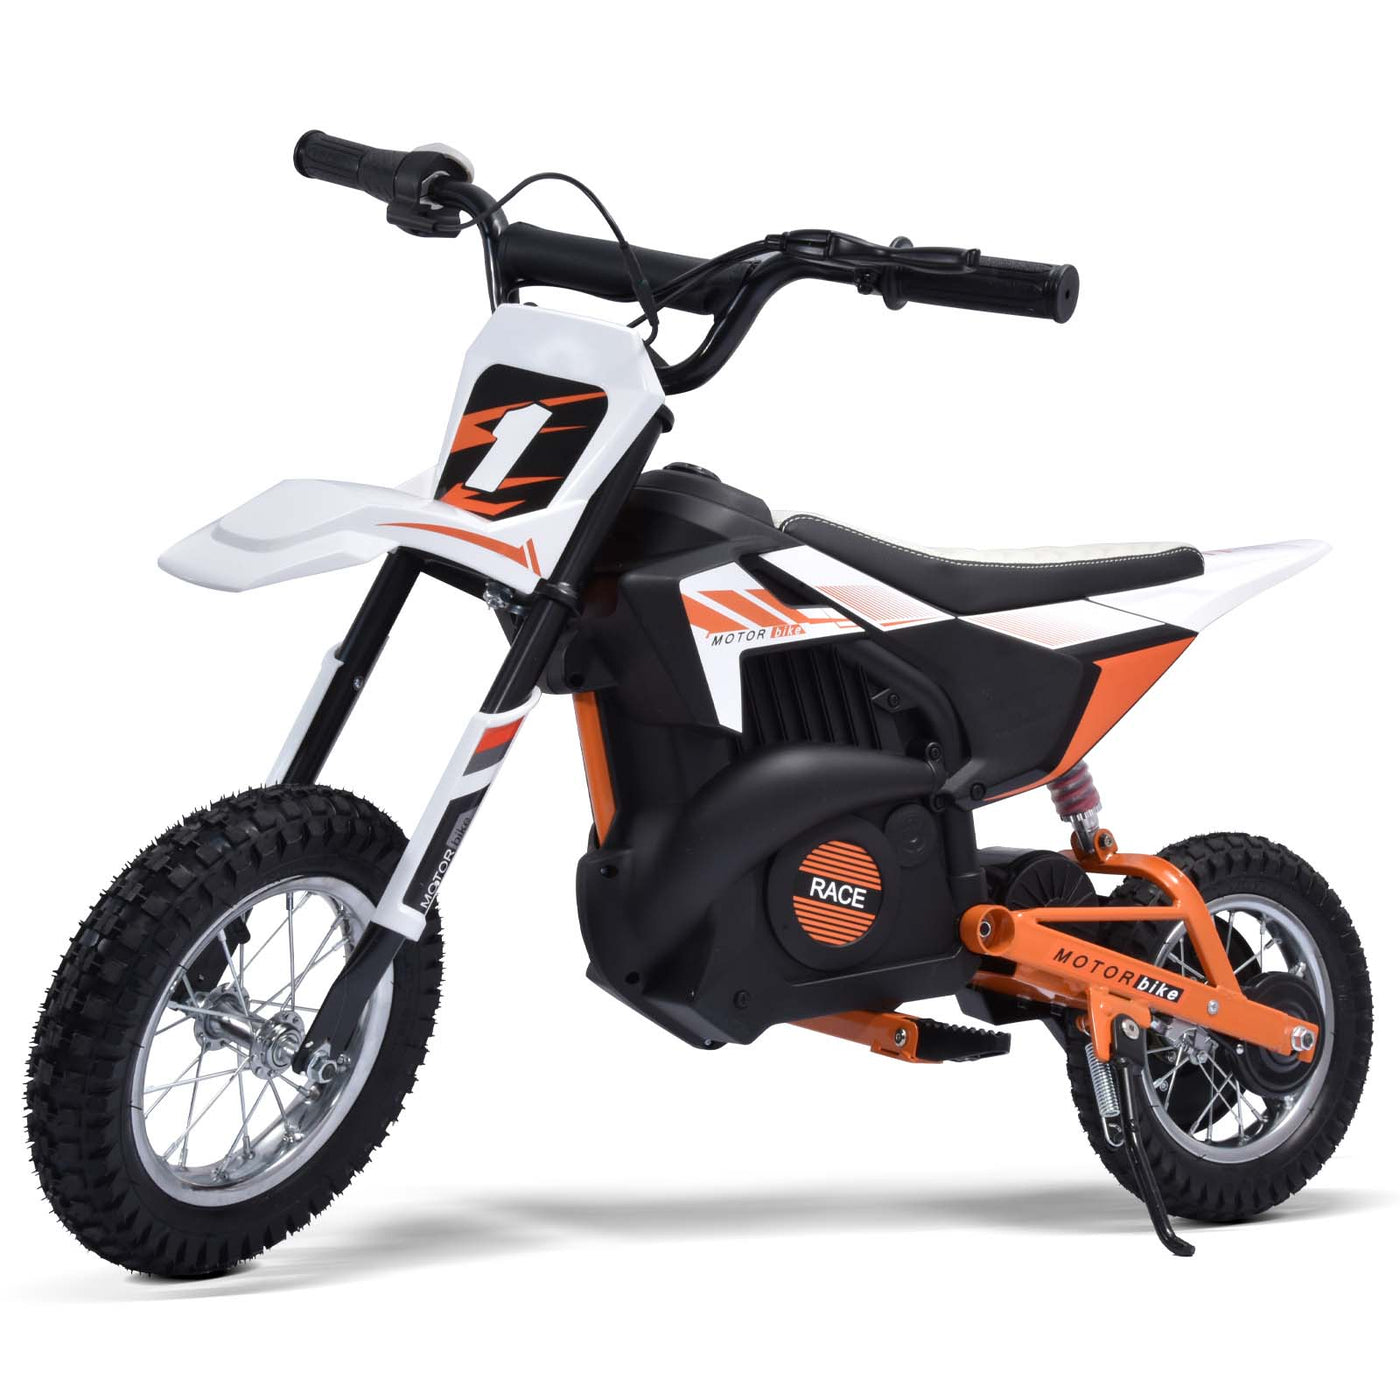 Blitzshark 24V Kids Electric Dirt Bike 250W Off-Road Bike Motocross Powerful Motorcycle for Kids, with 13.67MPH Fast Speed, Rubber Tires, Twist Grip Throttle, Metal Suspension & Leather Seat, SRK-MC10